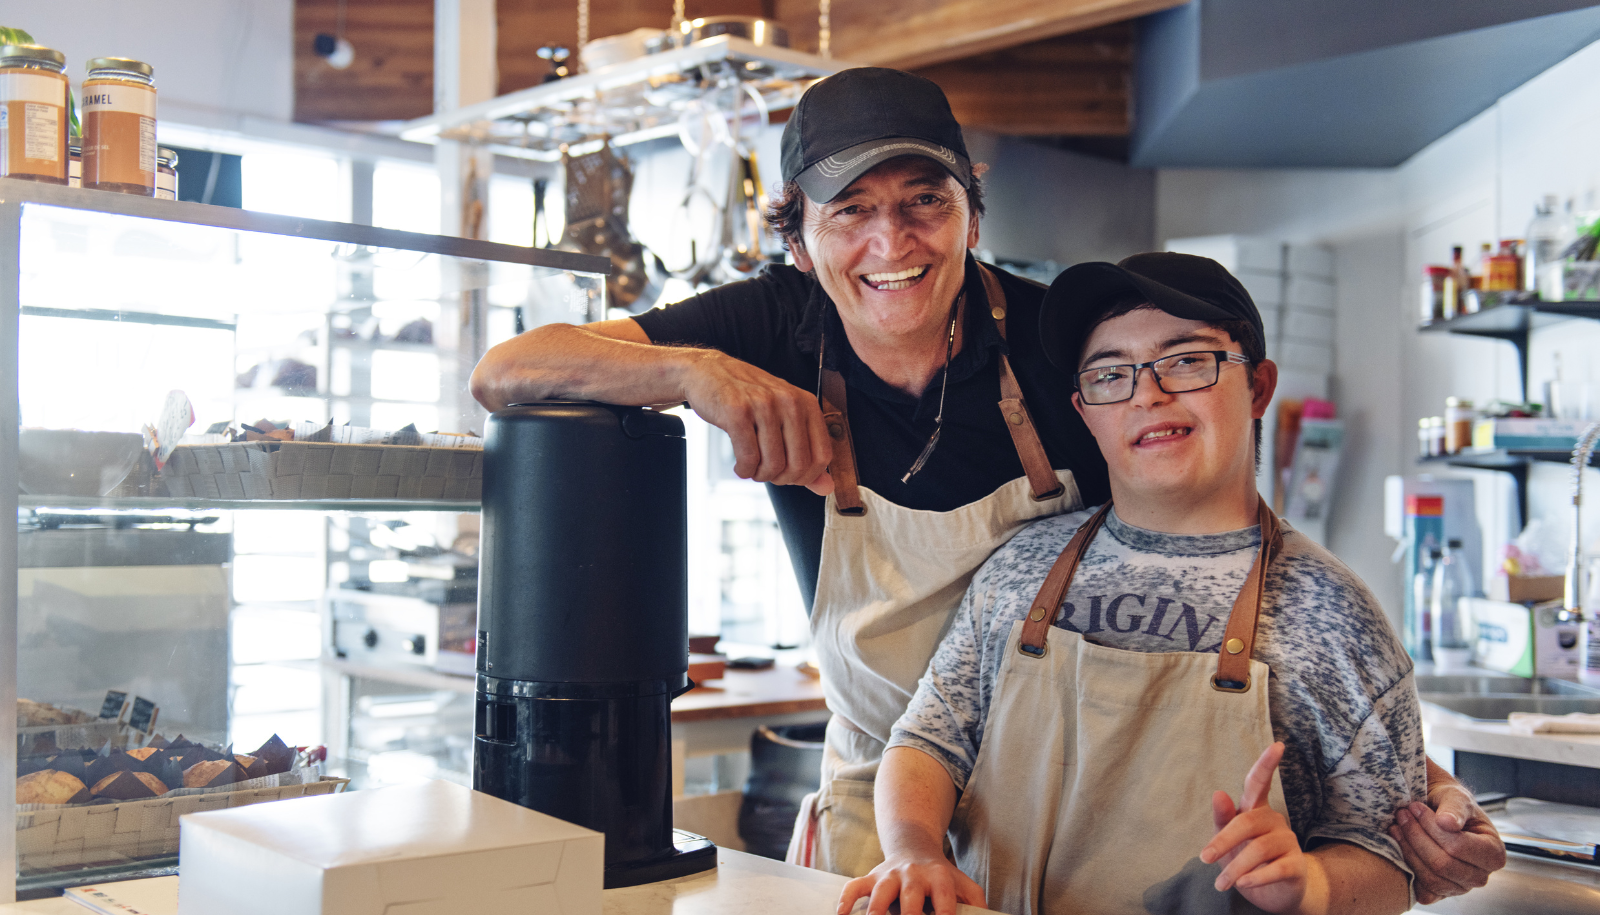 Two people working at a cafe smiling at the camera.